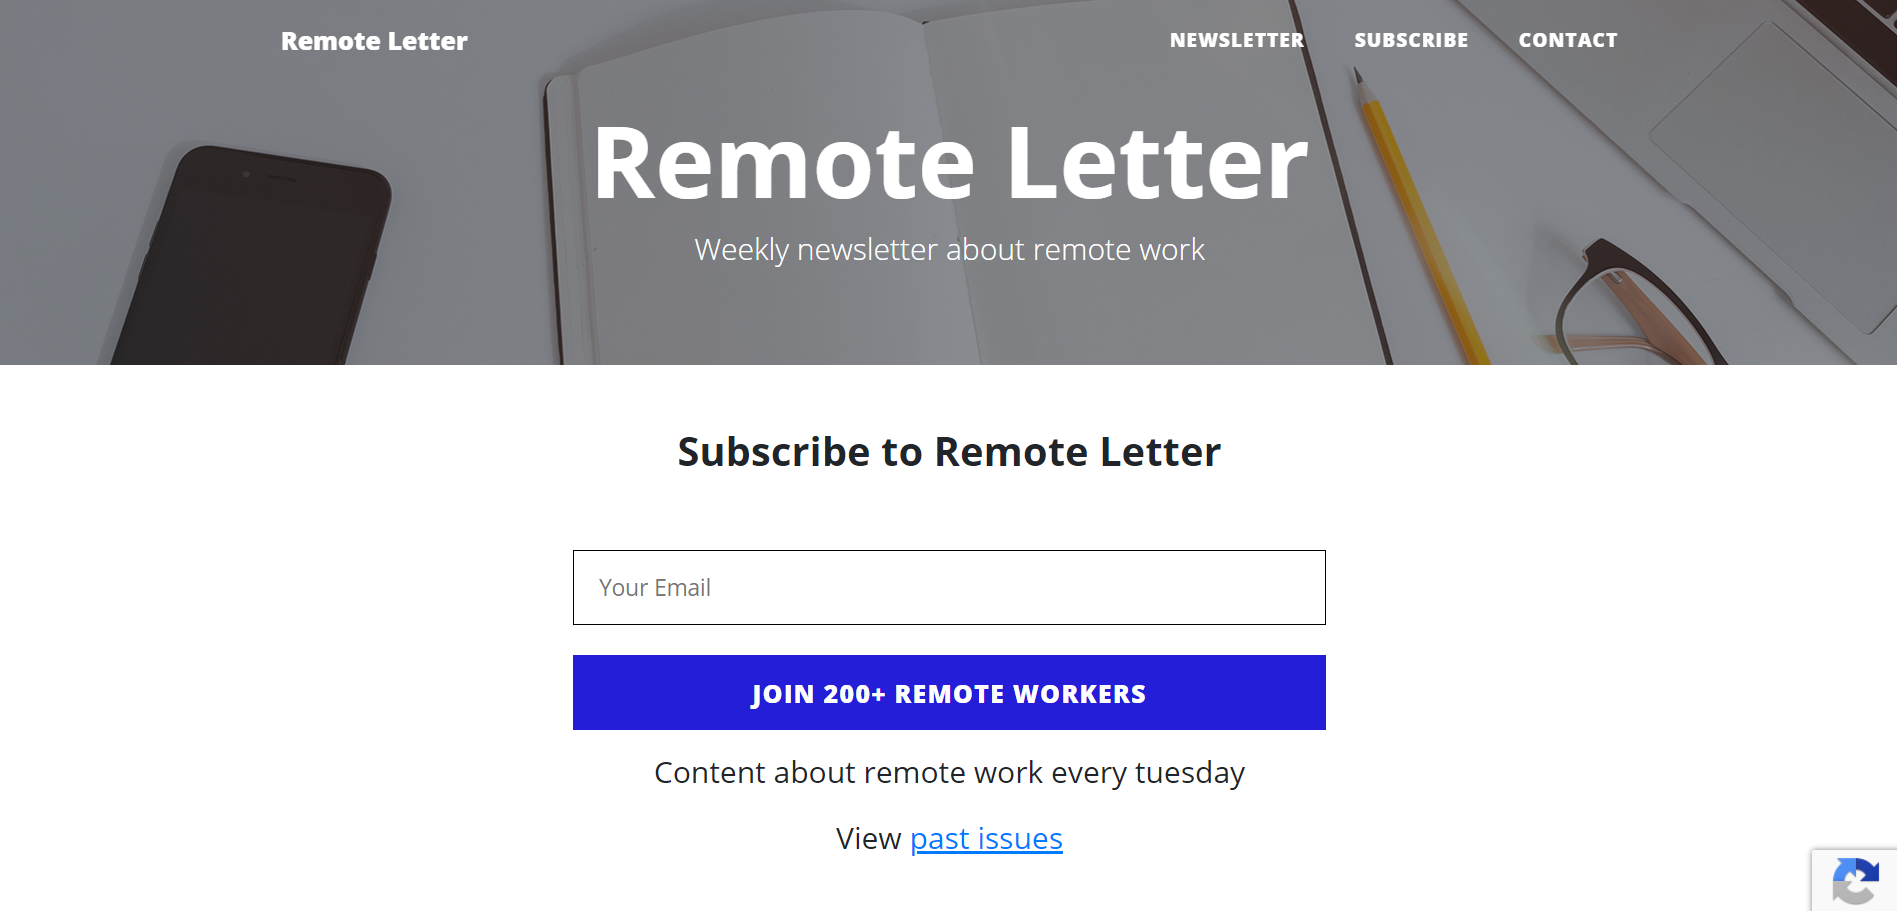 Find detailed information about Remote Letter